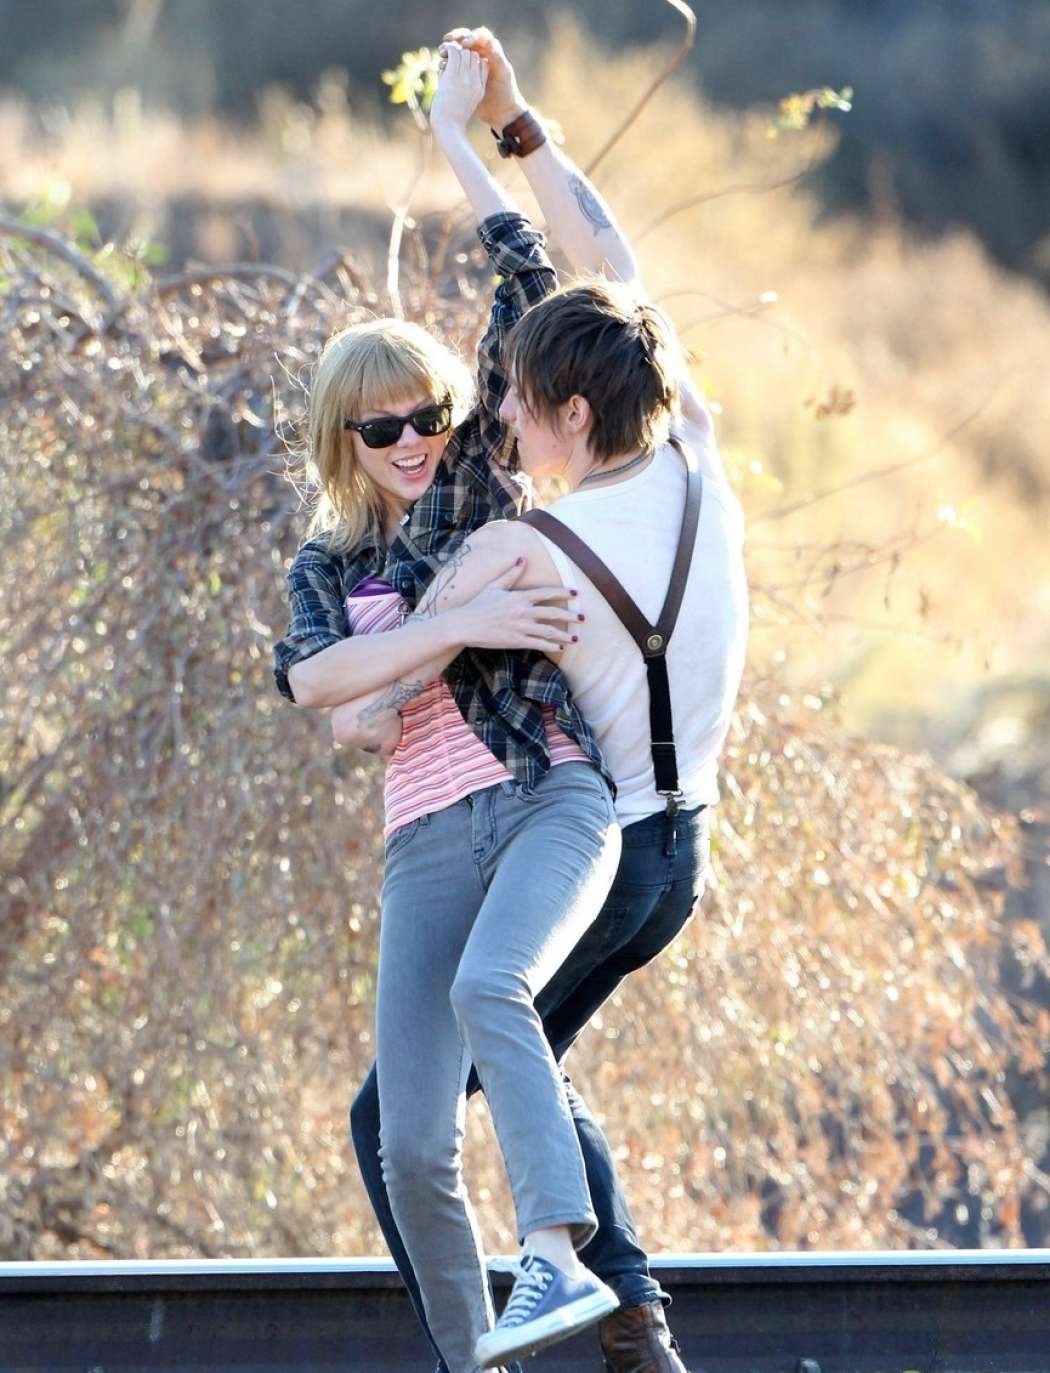 taylor-swift-piggy-back-ride-on-i-knew-you-were-trouble-set-09